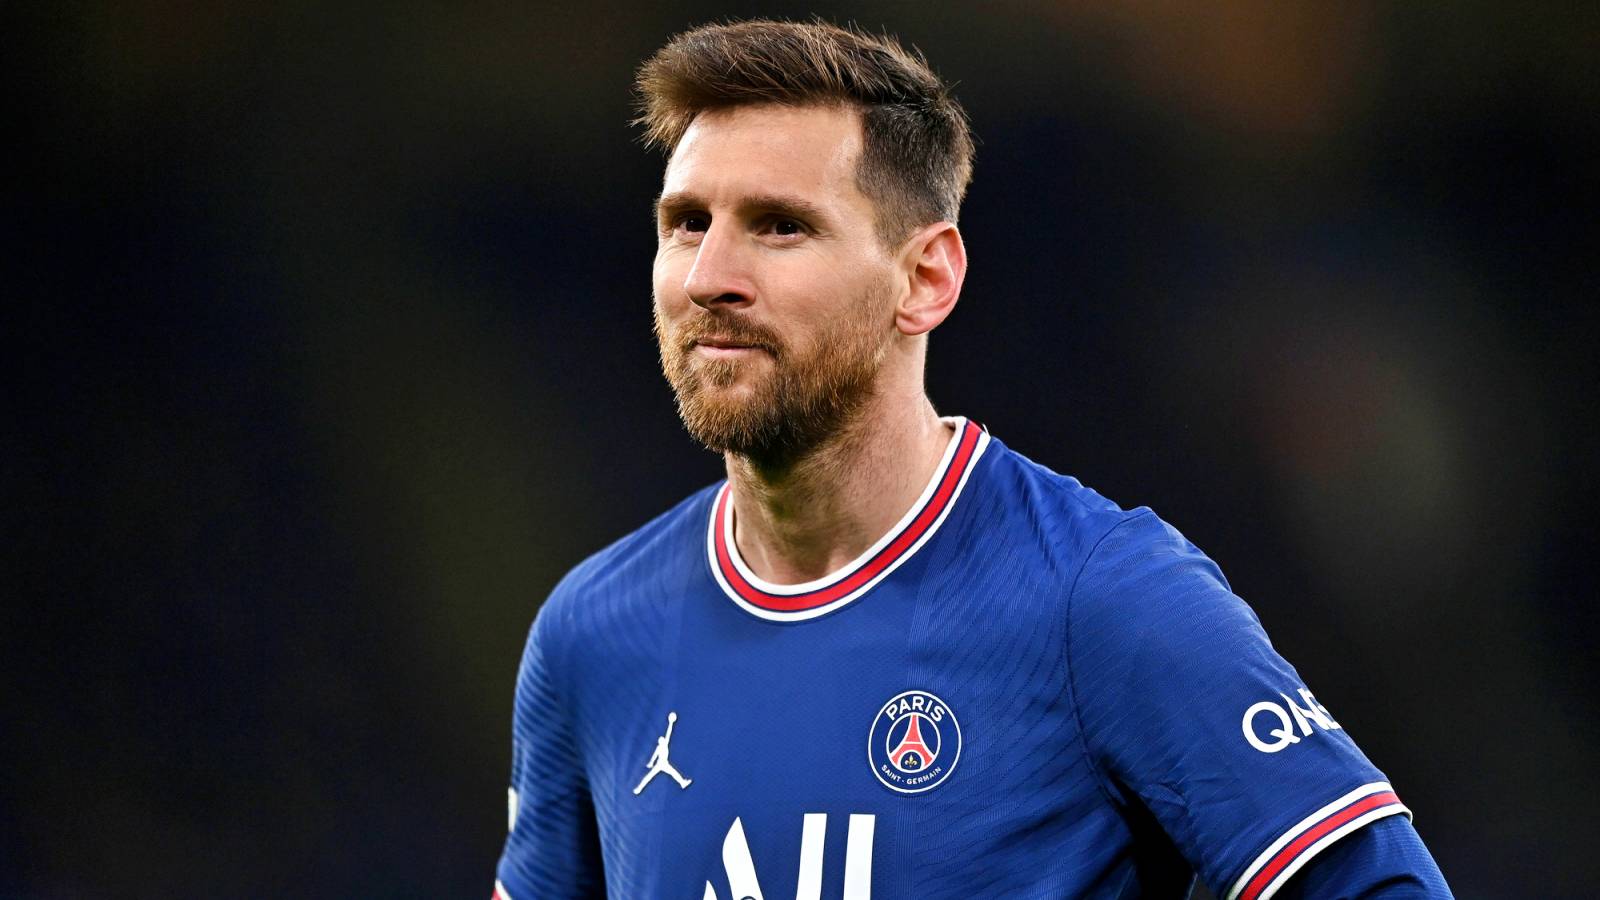 Lionel Messi Tested POSITIVE for COVID-19 PSG Announced